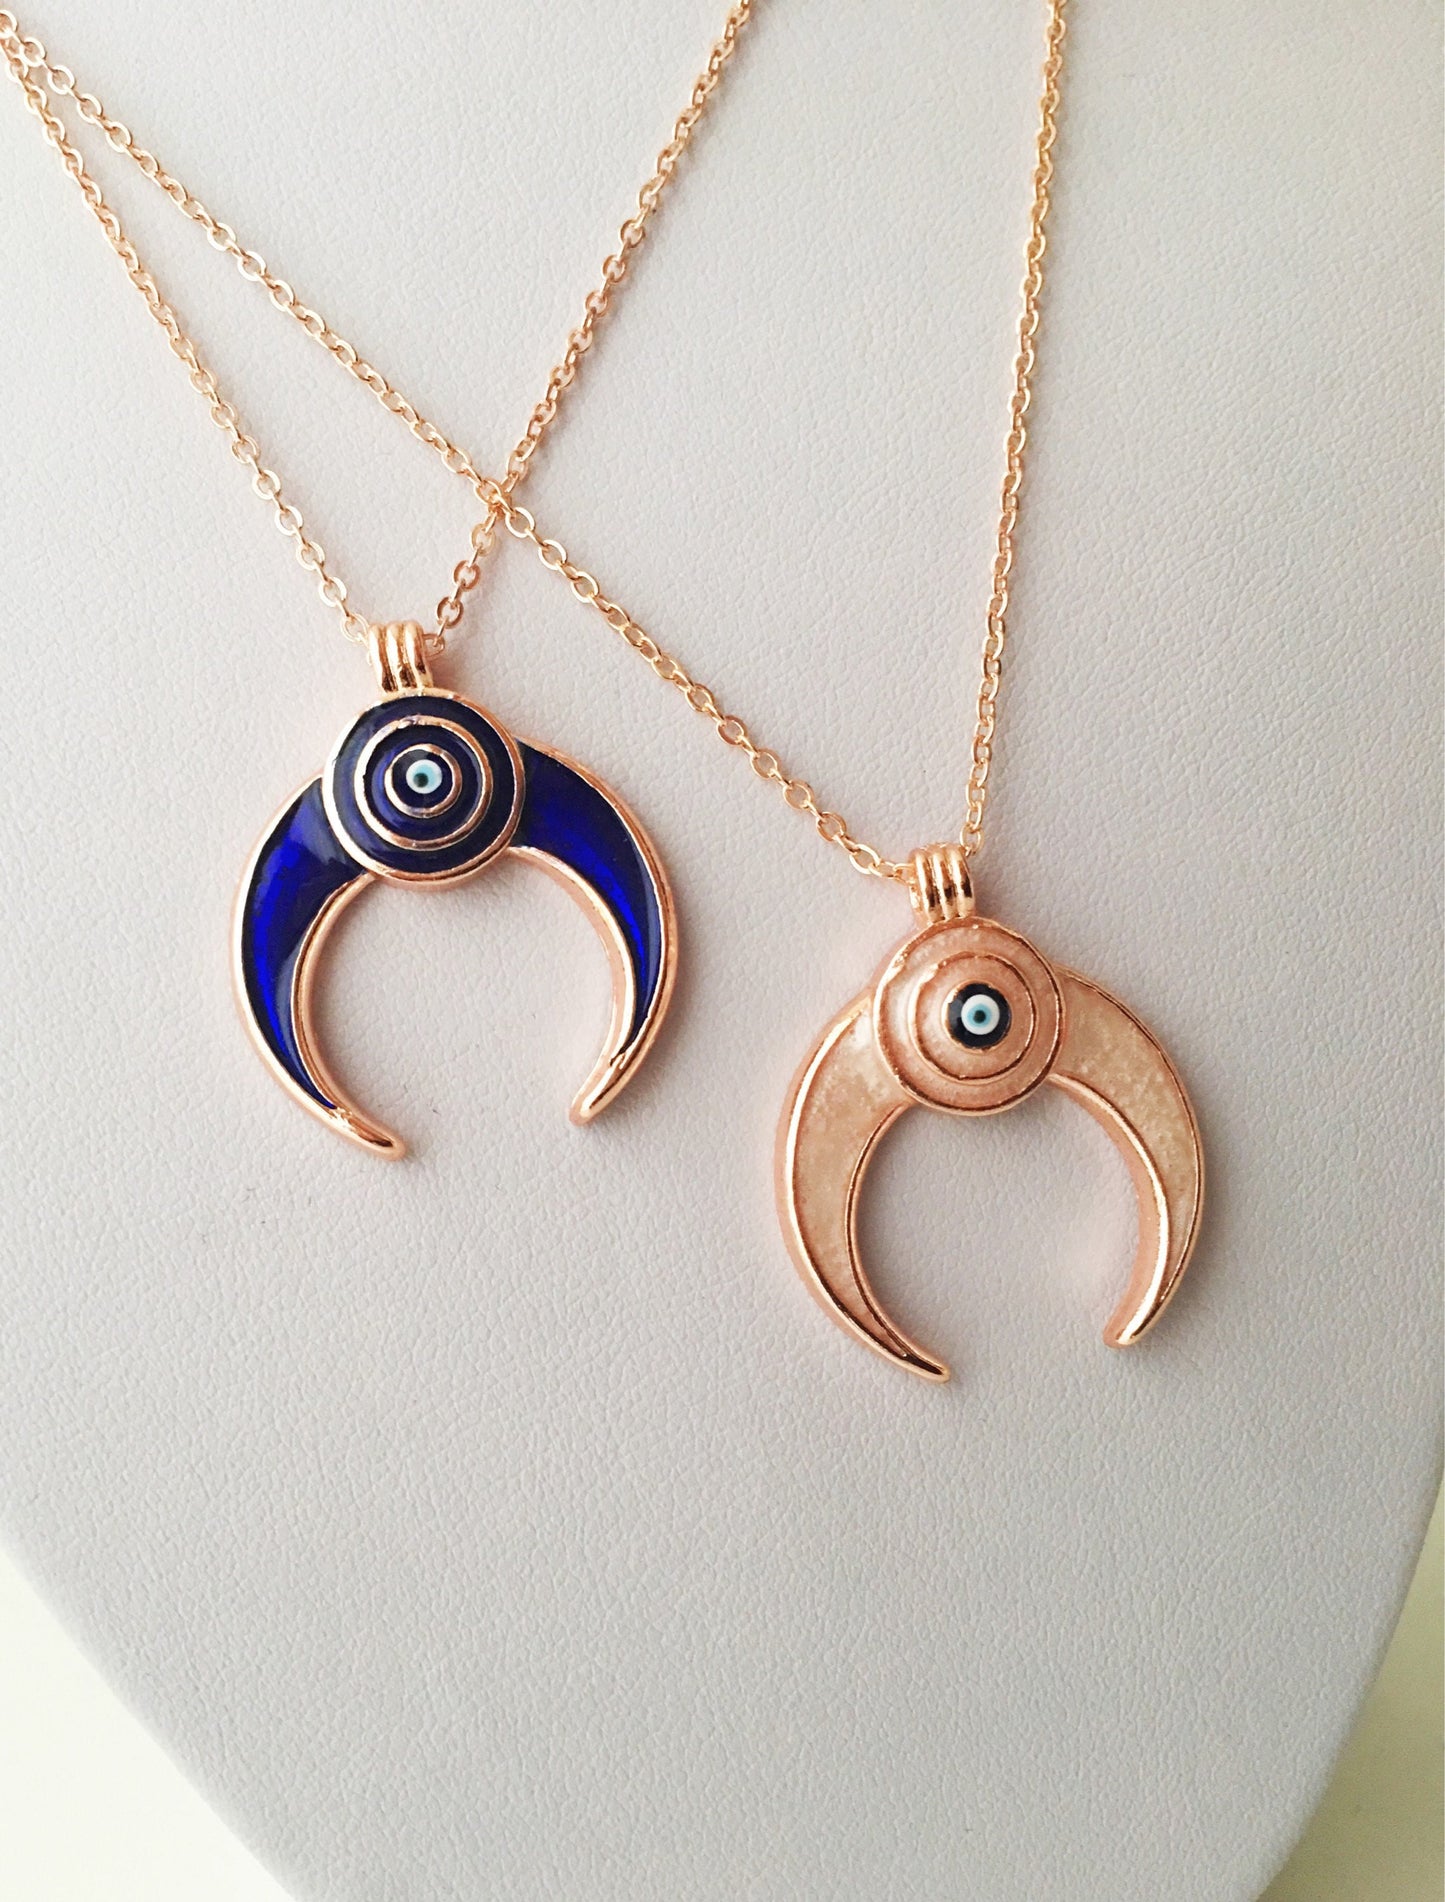 Double Horn necklace, Evil Eye necklace, Crescent Moon necklace